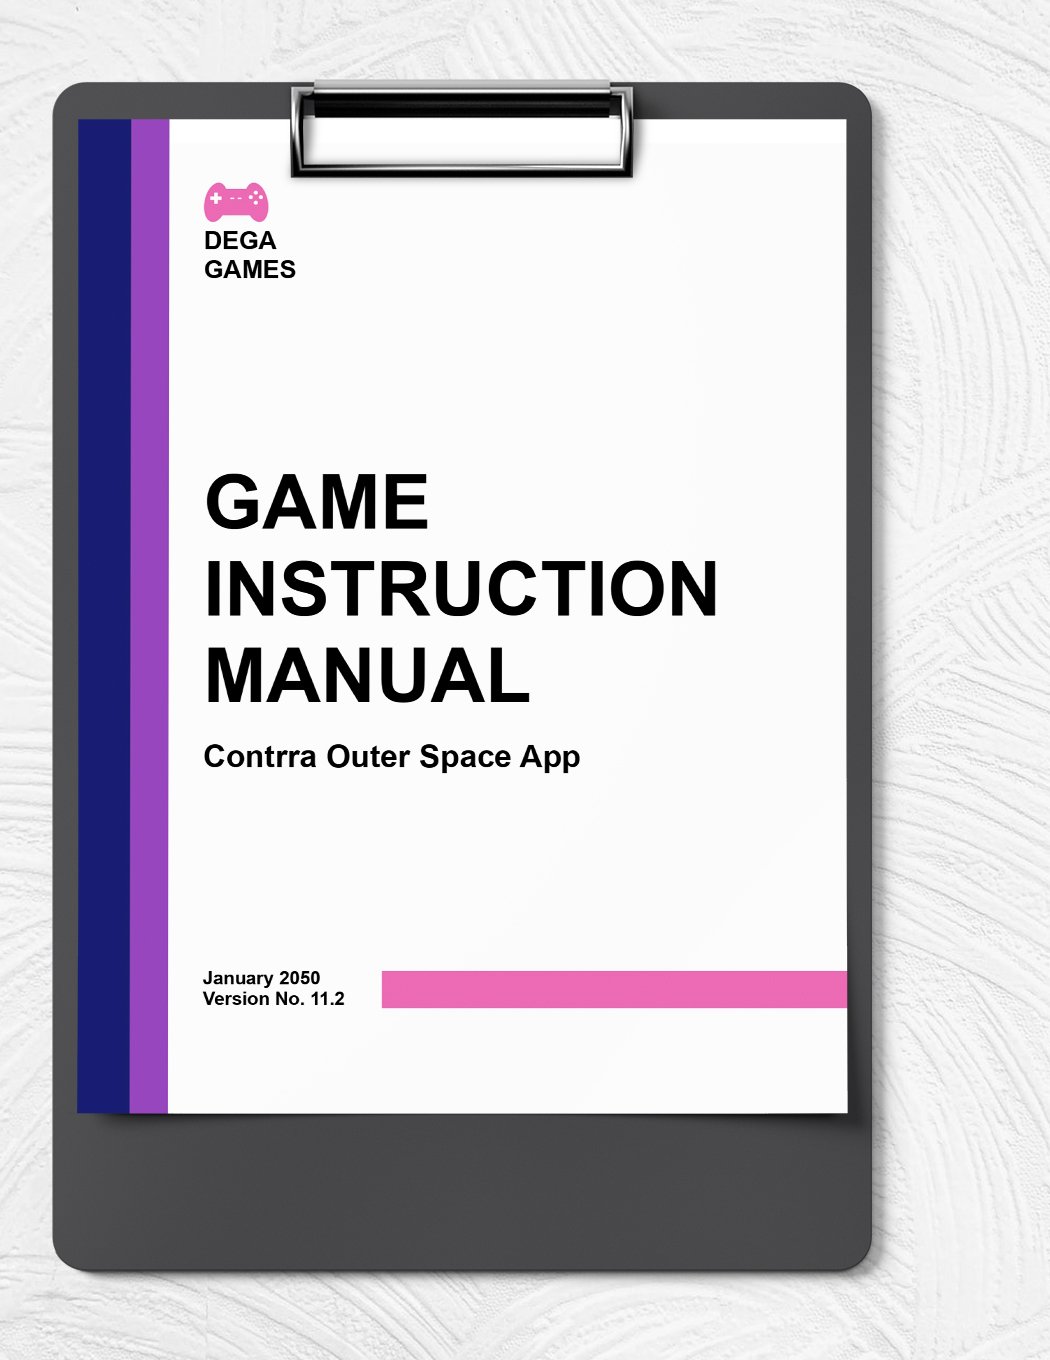 Game Instruction Manual Template